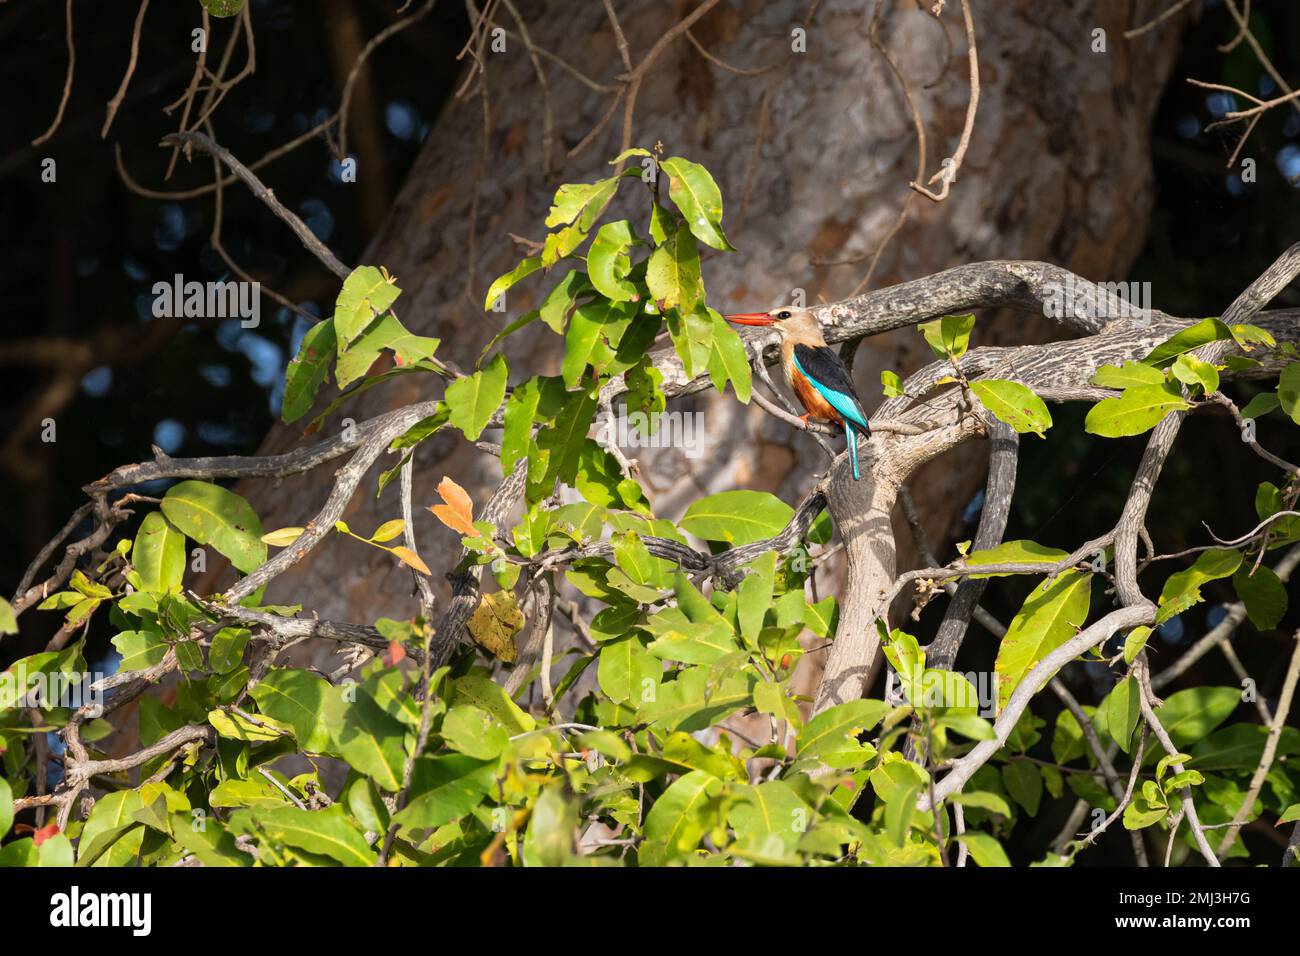 Grey-headed kingfisher (Halcyon leucocephala), perched on branch, Gambia, Africa Stock Photo